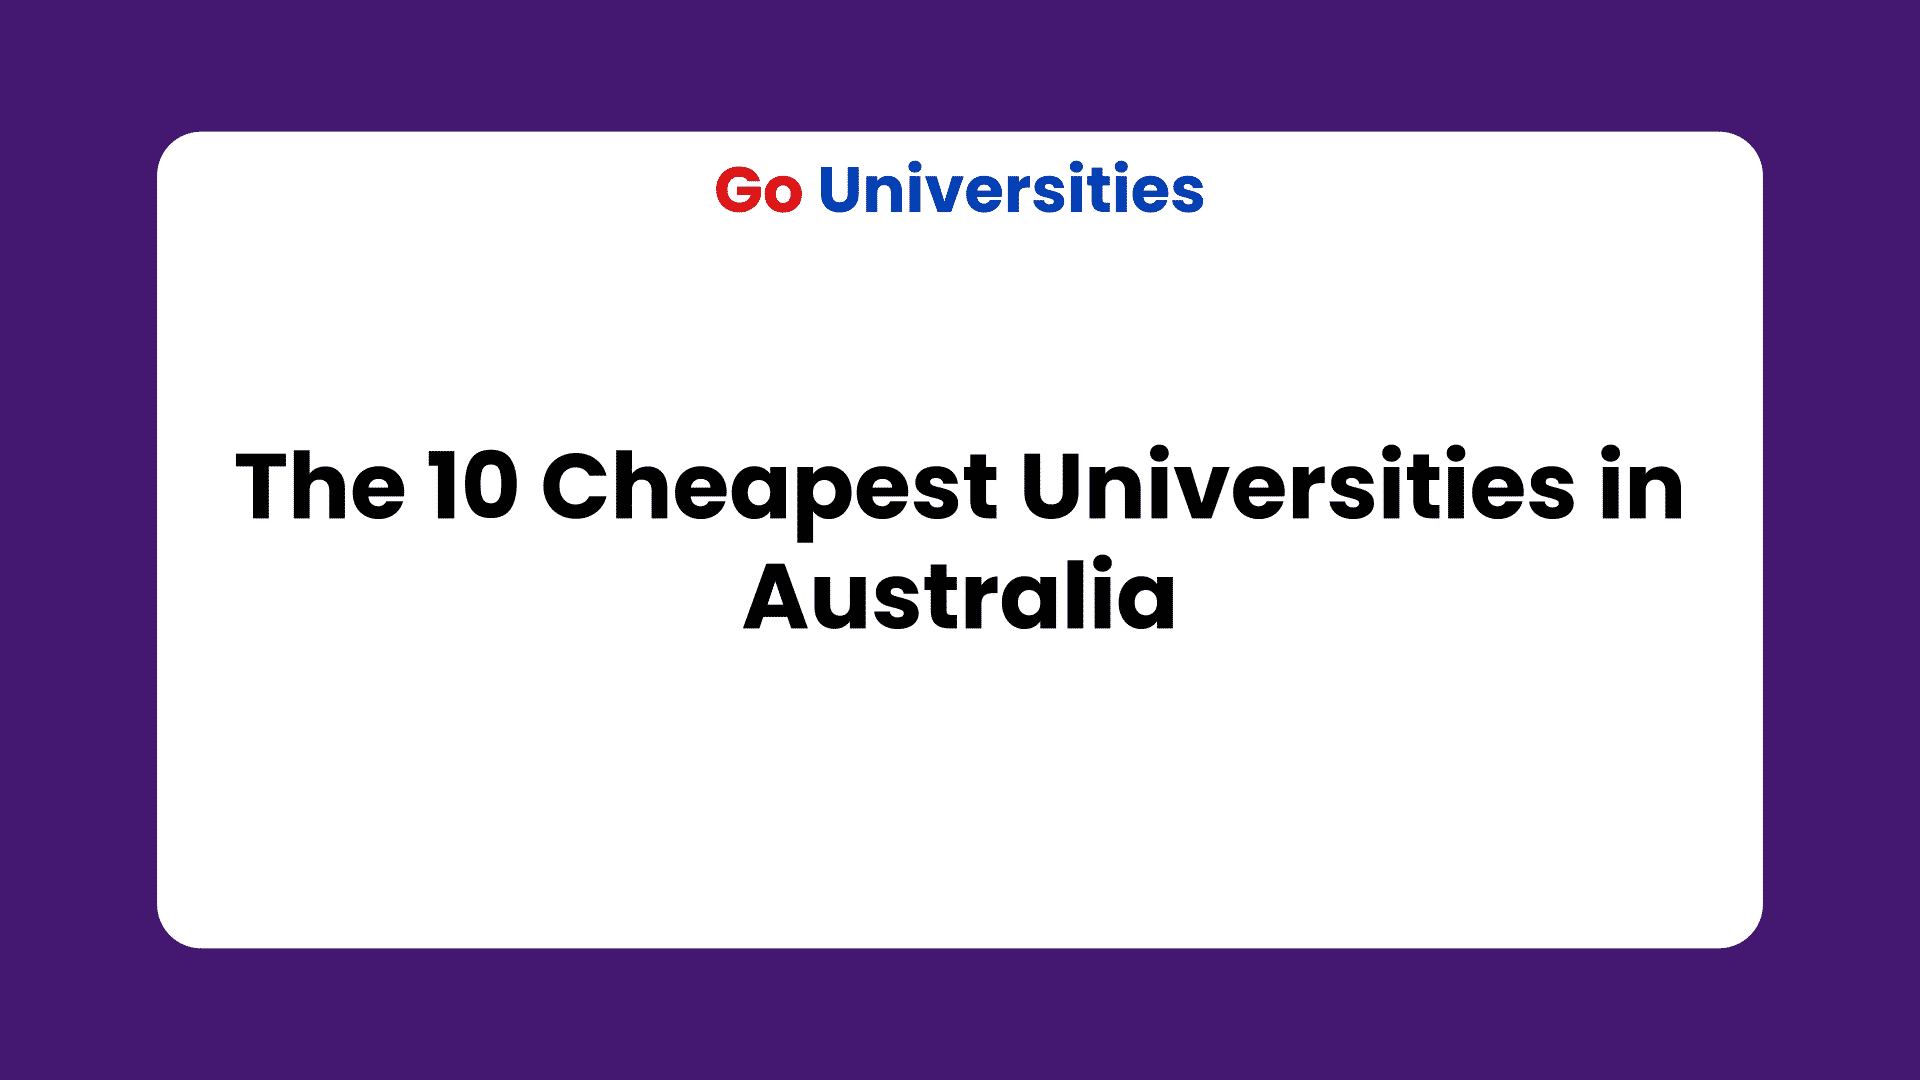 The 10 Cheapest Universities in Australia for international students